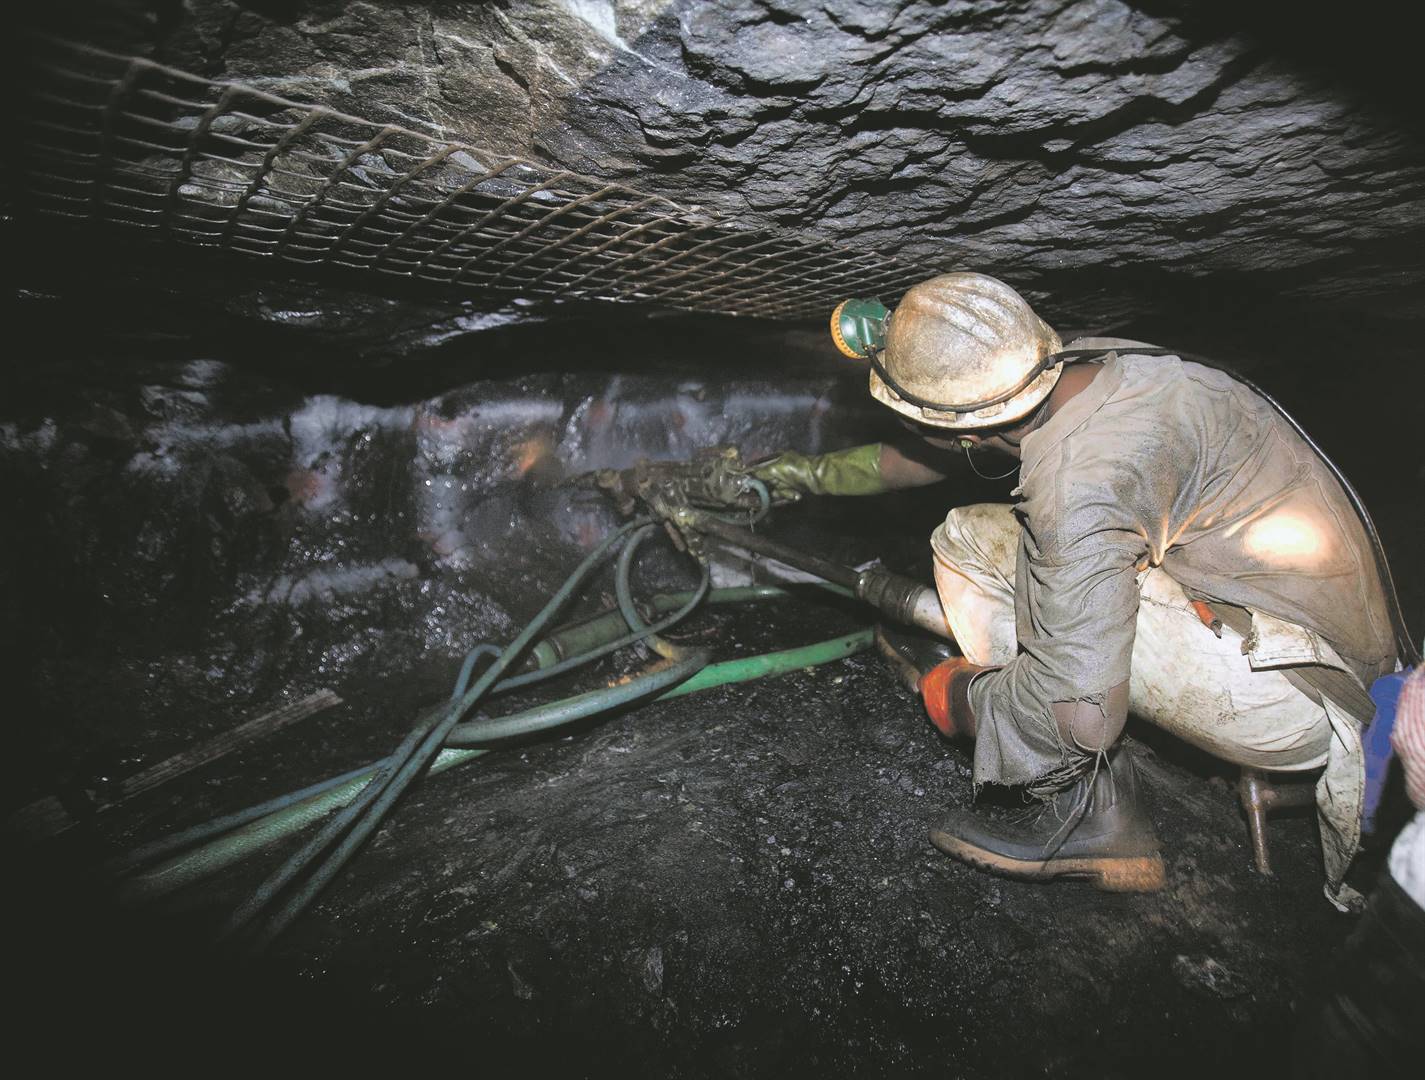 A mineworker with a drill on the rock face. Mine safety has again come under scrutiny following deaths this year. Photo: Bloomberg